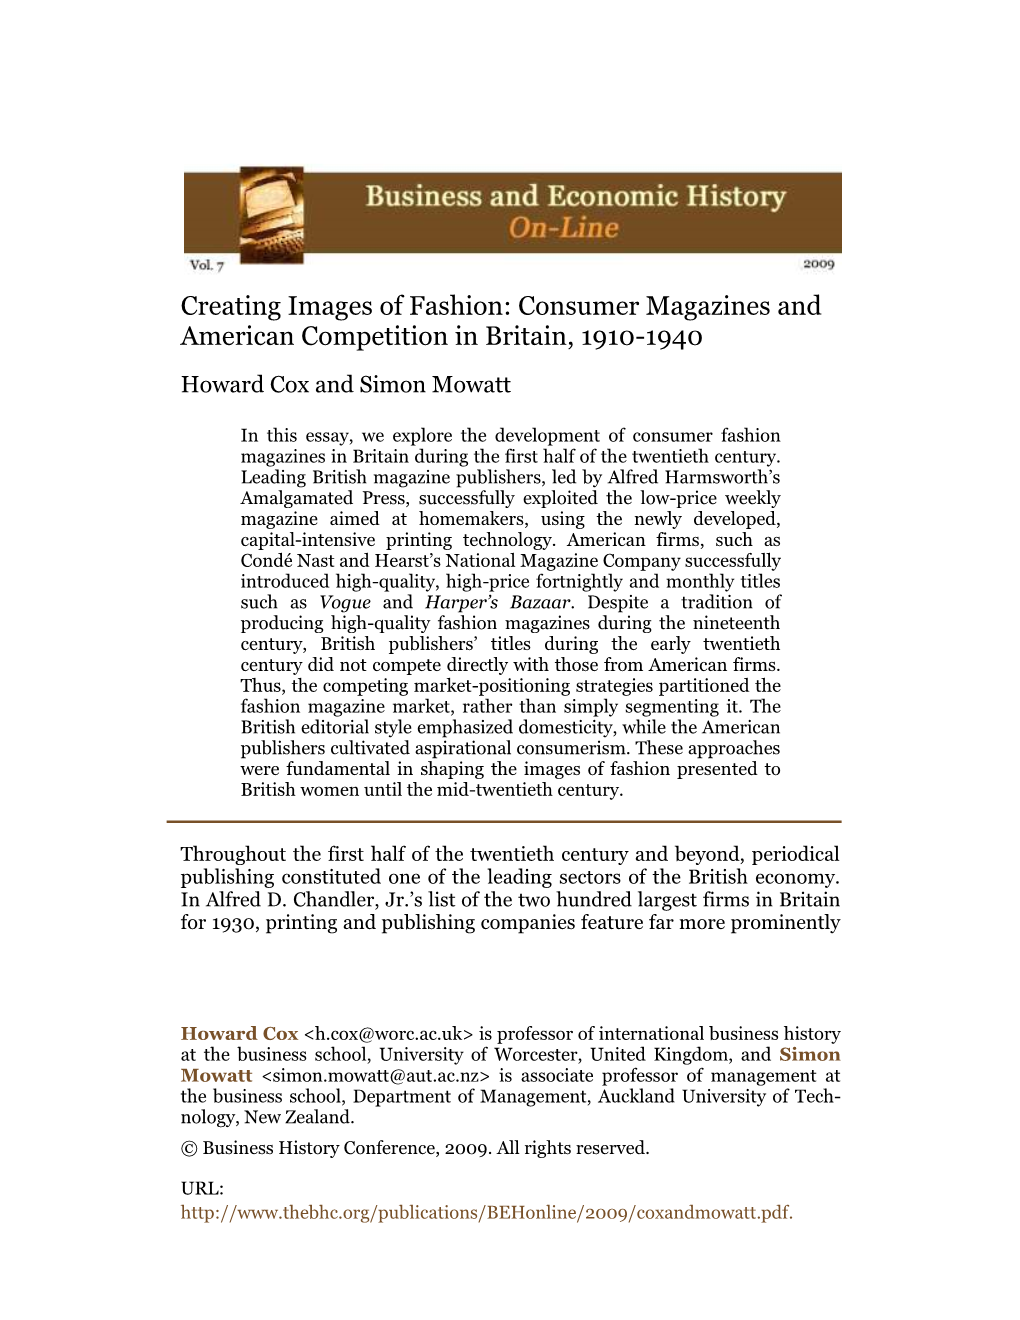 Consumer Magazines and American Competition in Britain, 1910-1940 Howard Cox and Simon Mowatt